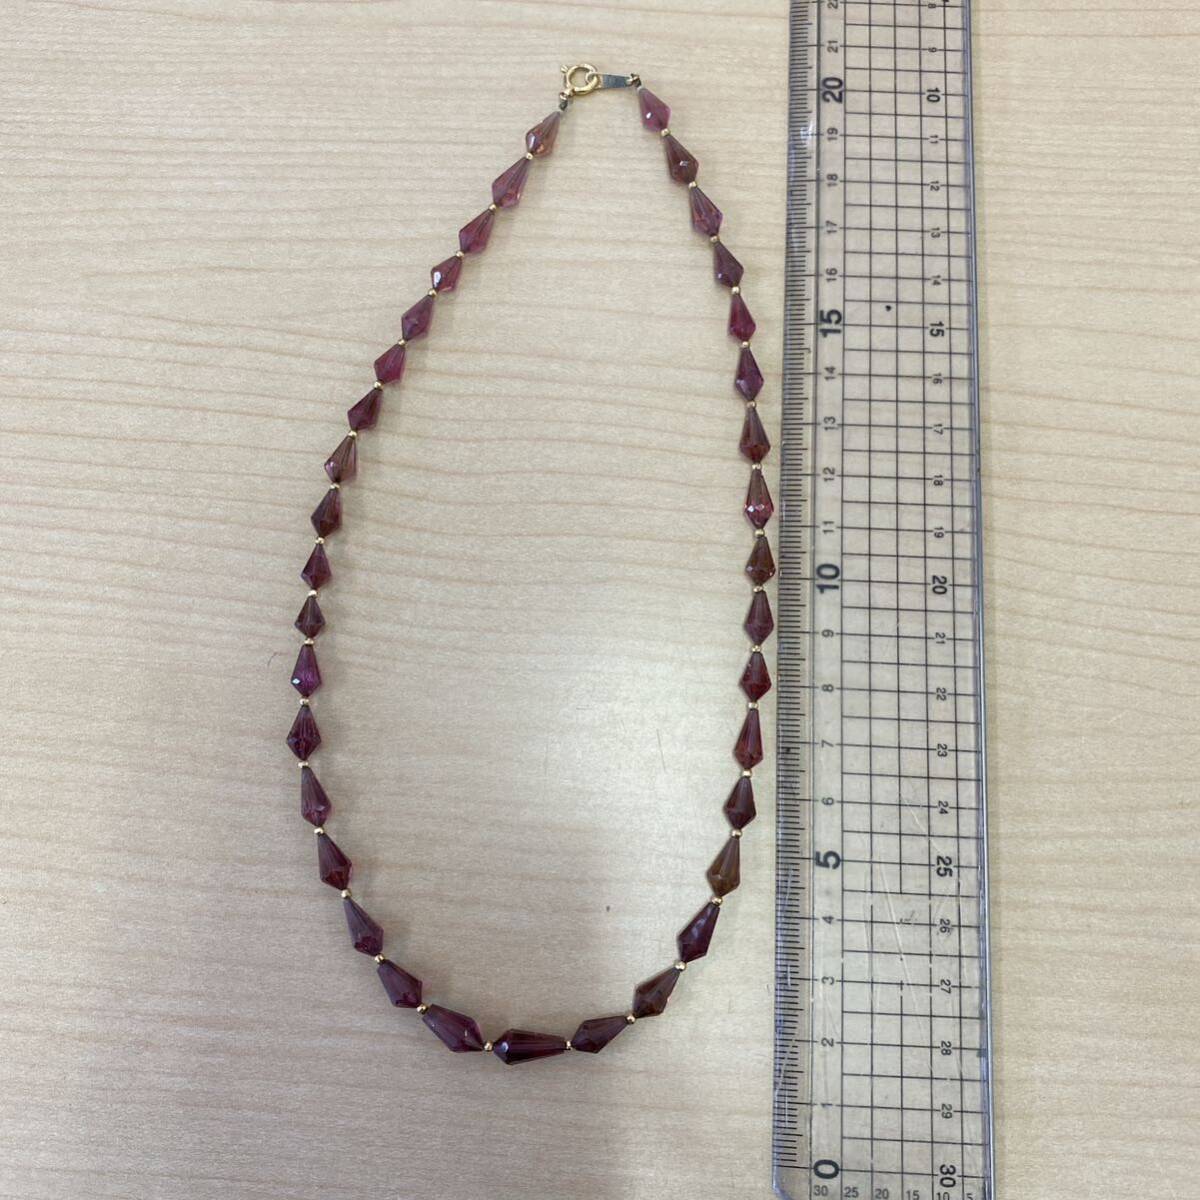 [TM0413] K18 stamp equipped stone attaching necklace approximately 13.5g pink . stone unknown color stone? accessory scratch equipped dirt equipped 